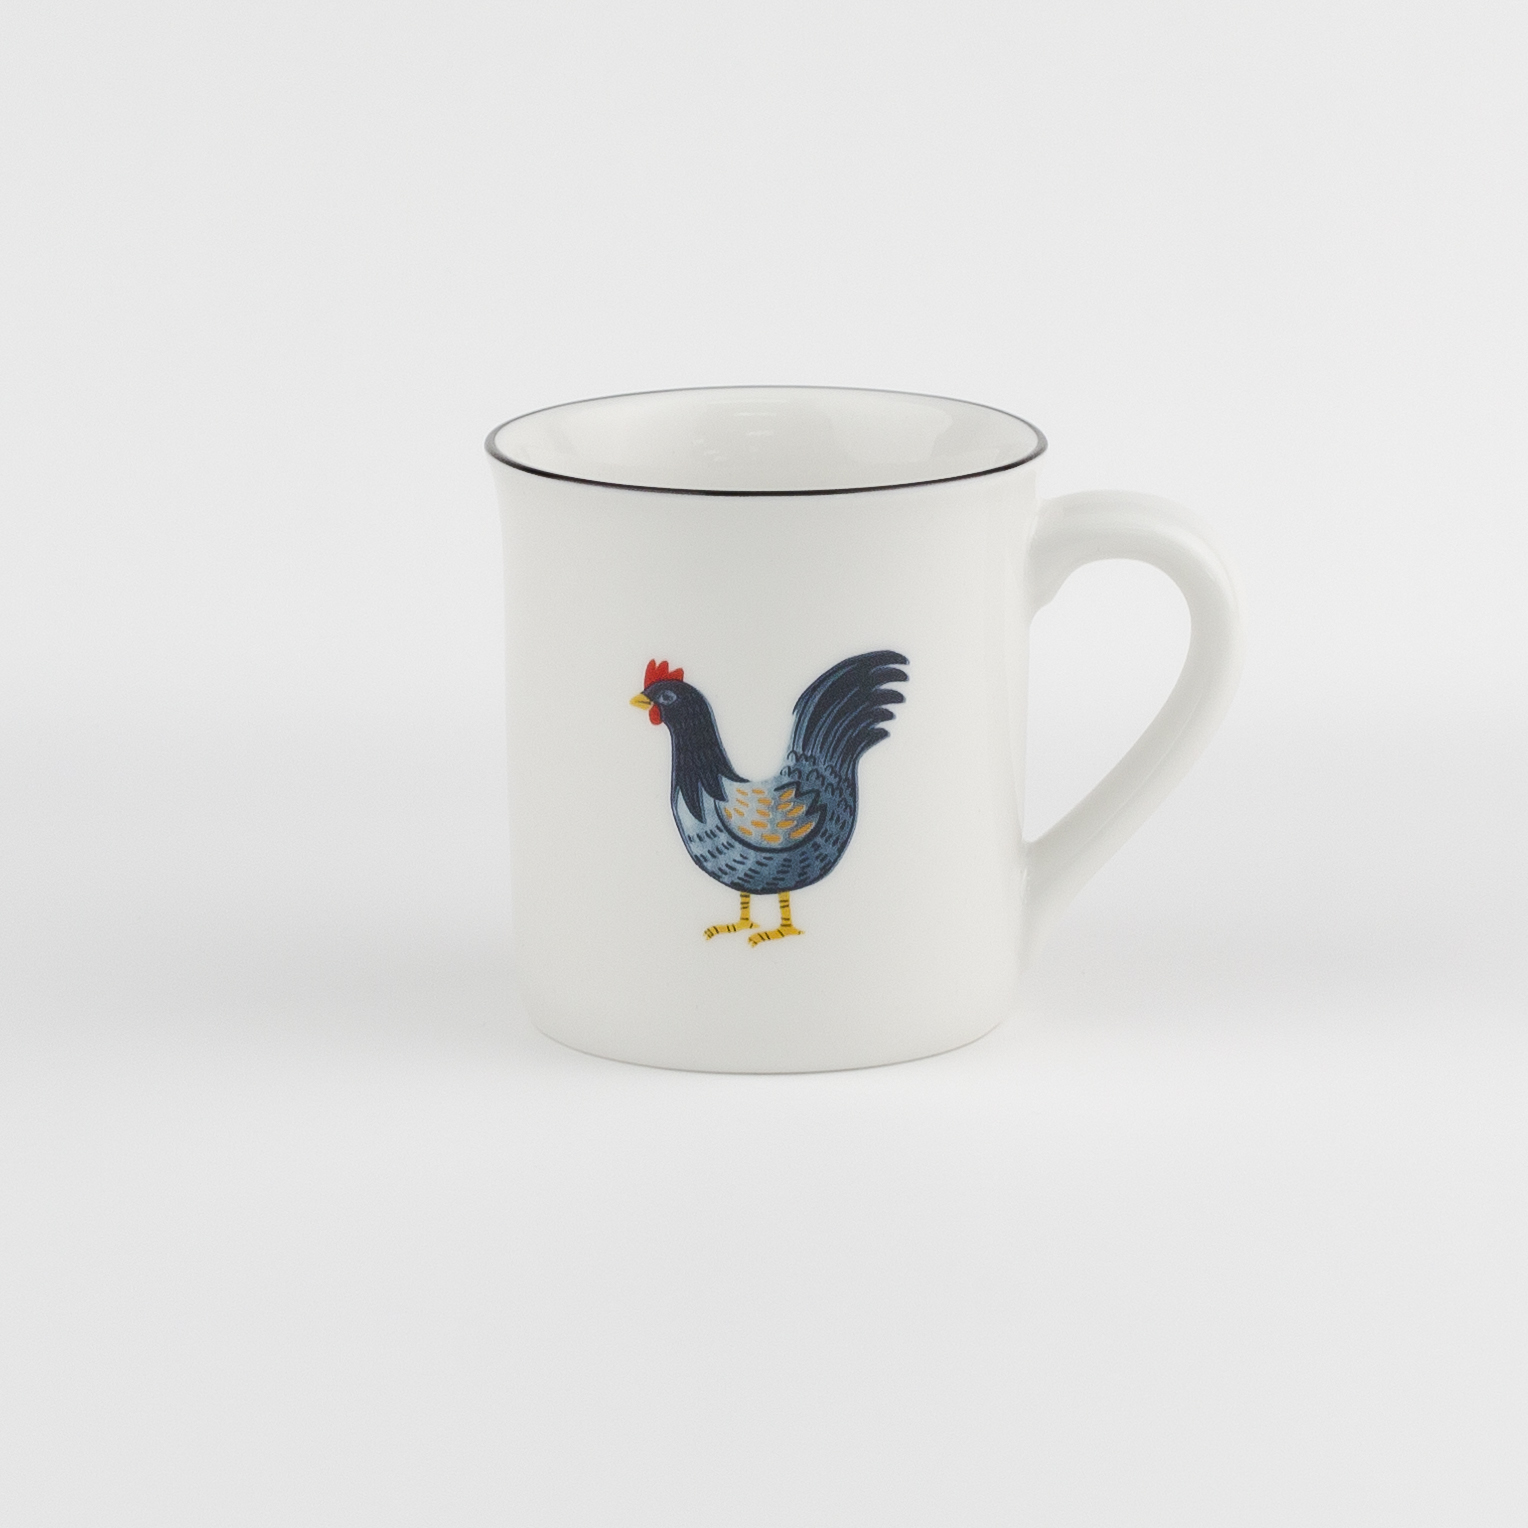 COUNTRY HARVEST – Mug – 380ml – Rooster